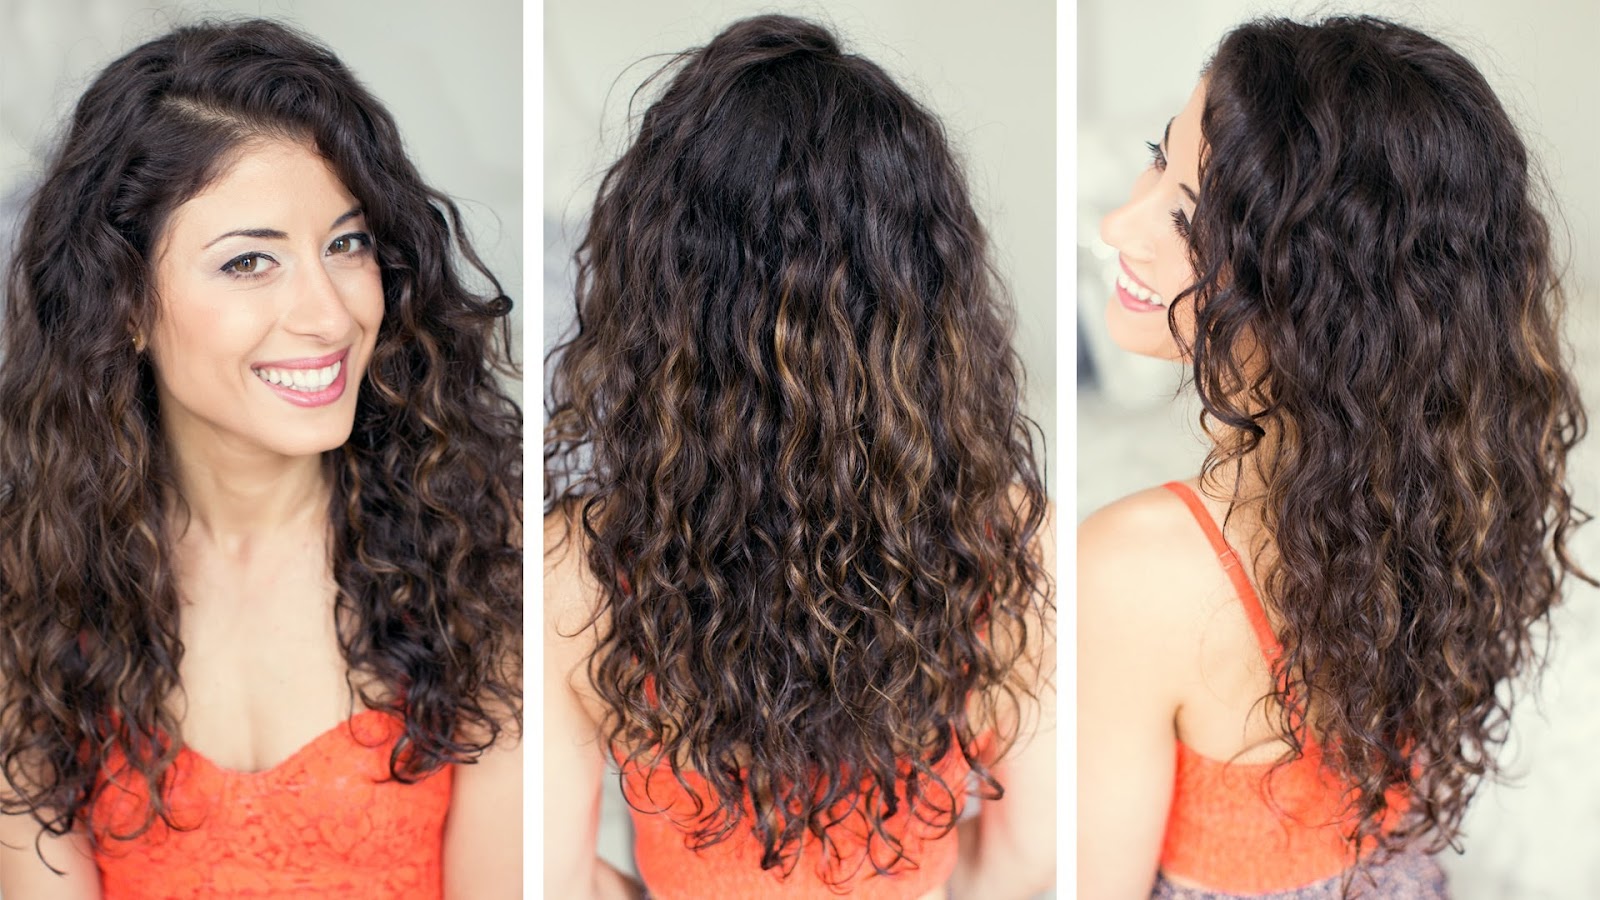 Midnight Blue Curly Hair: Pros and Cons to Consider - wide 7